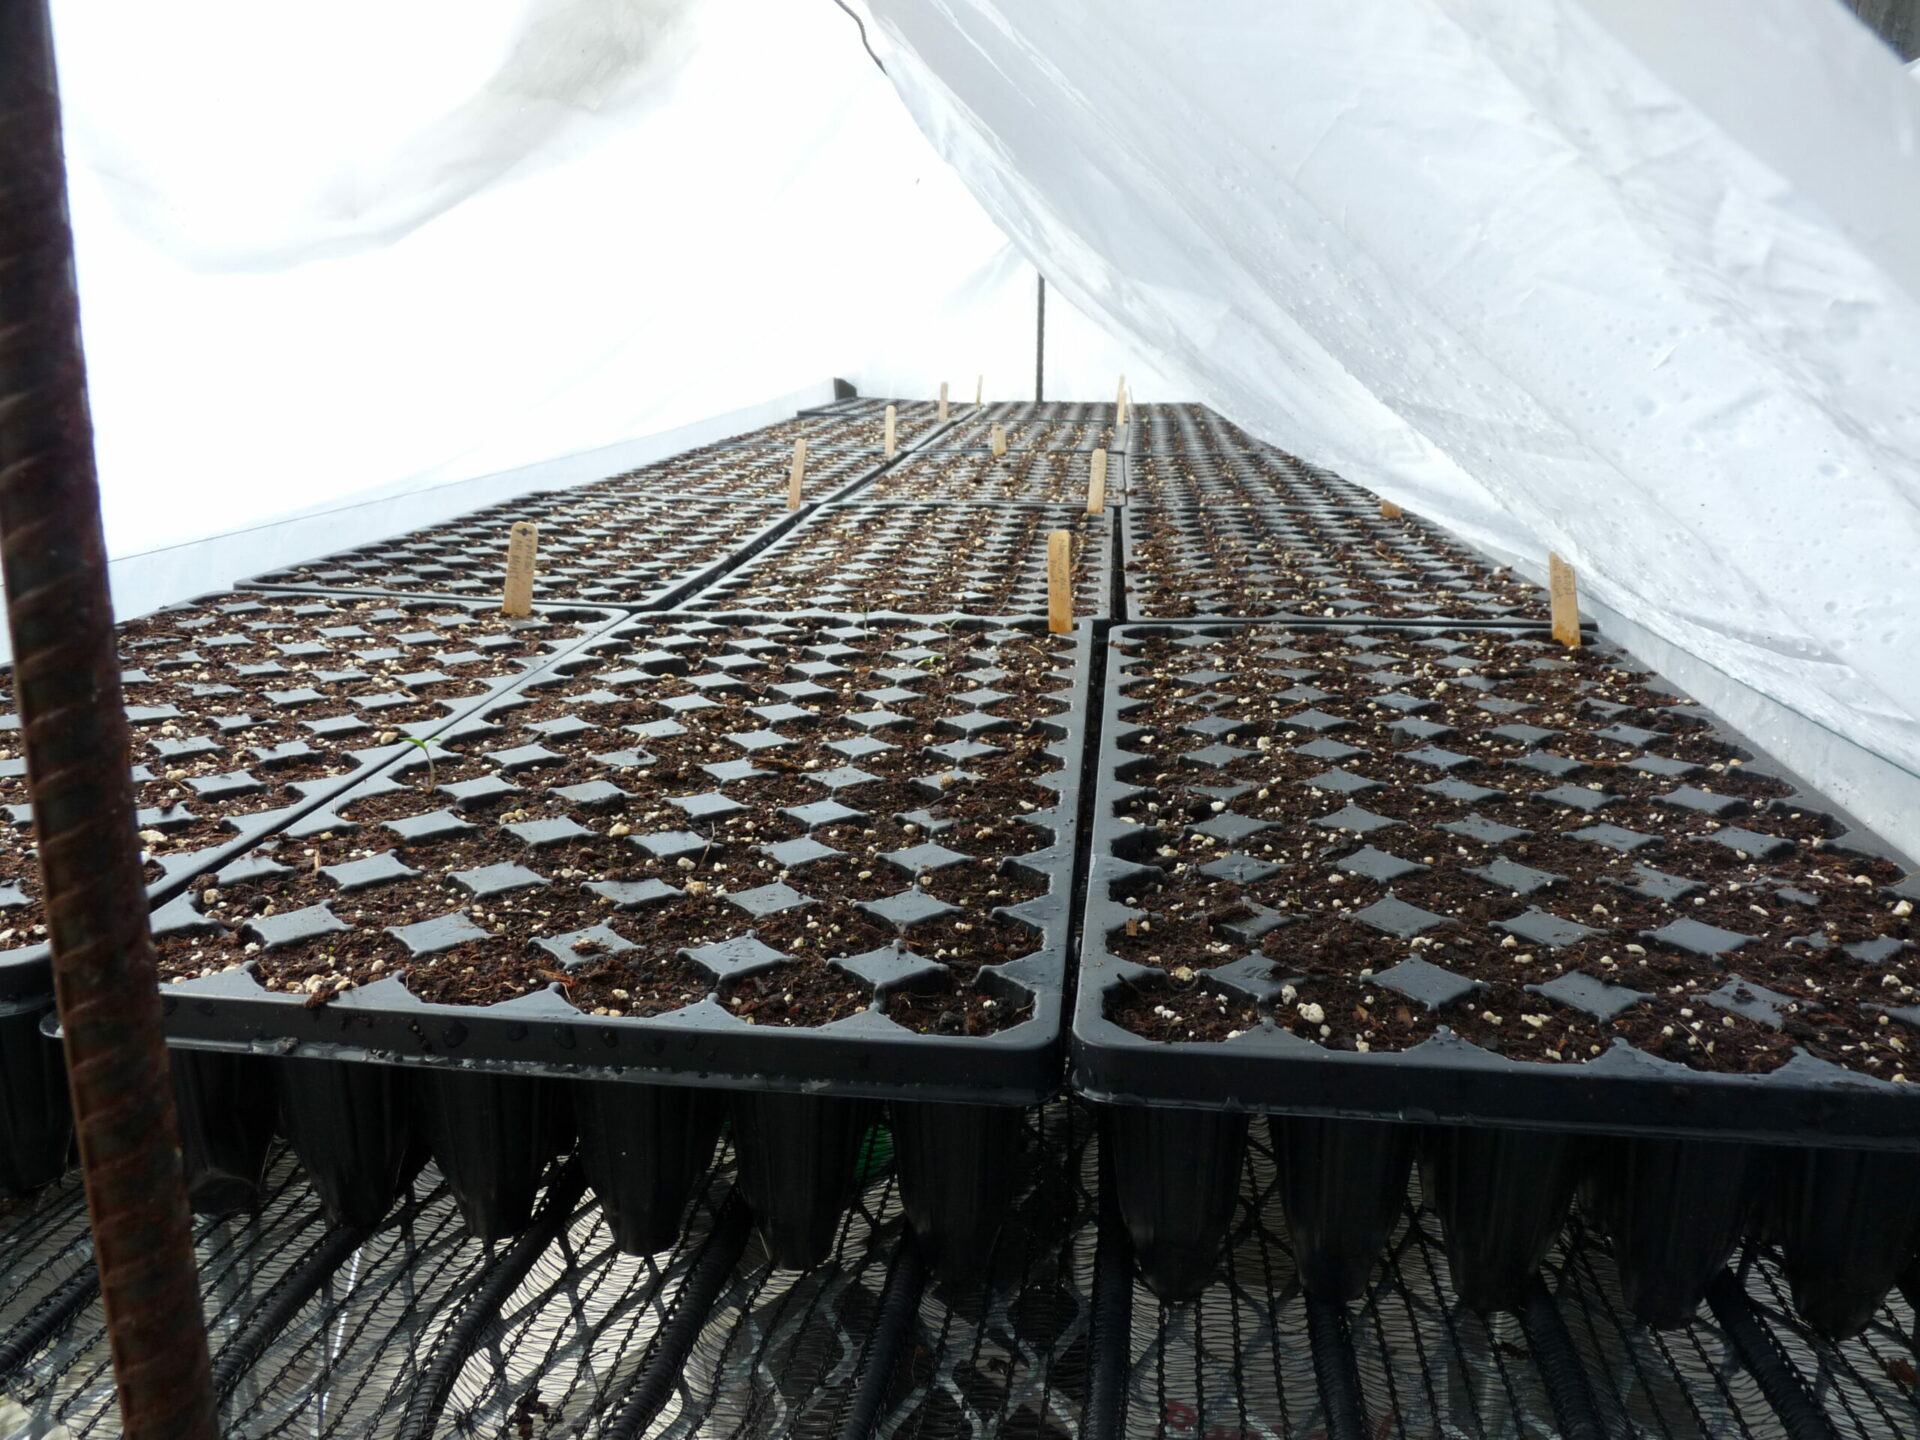 Seeded trays in a germination chamber. Ecotype Seed.